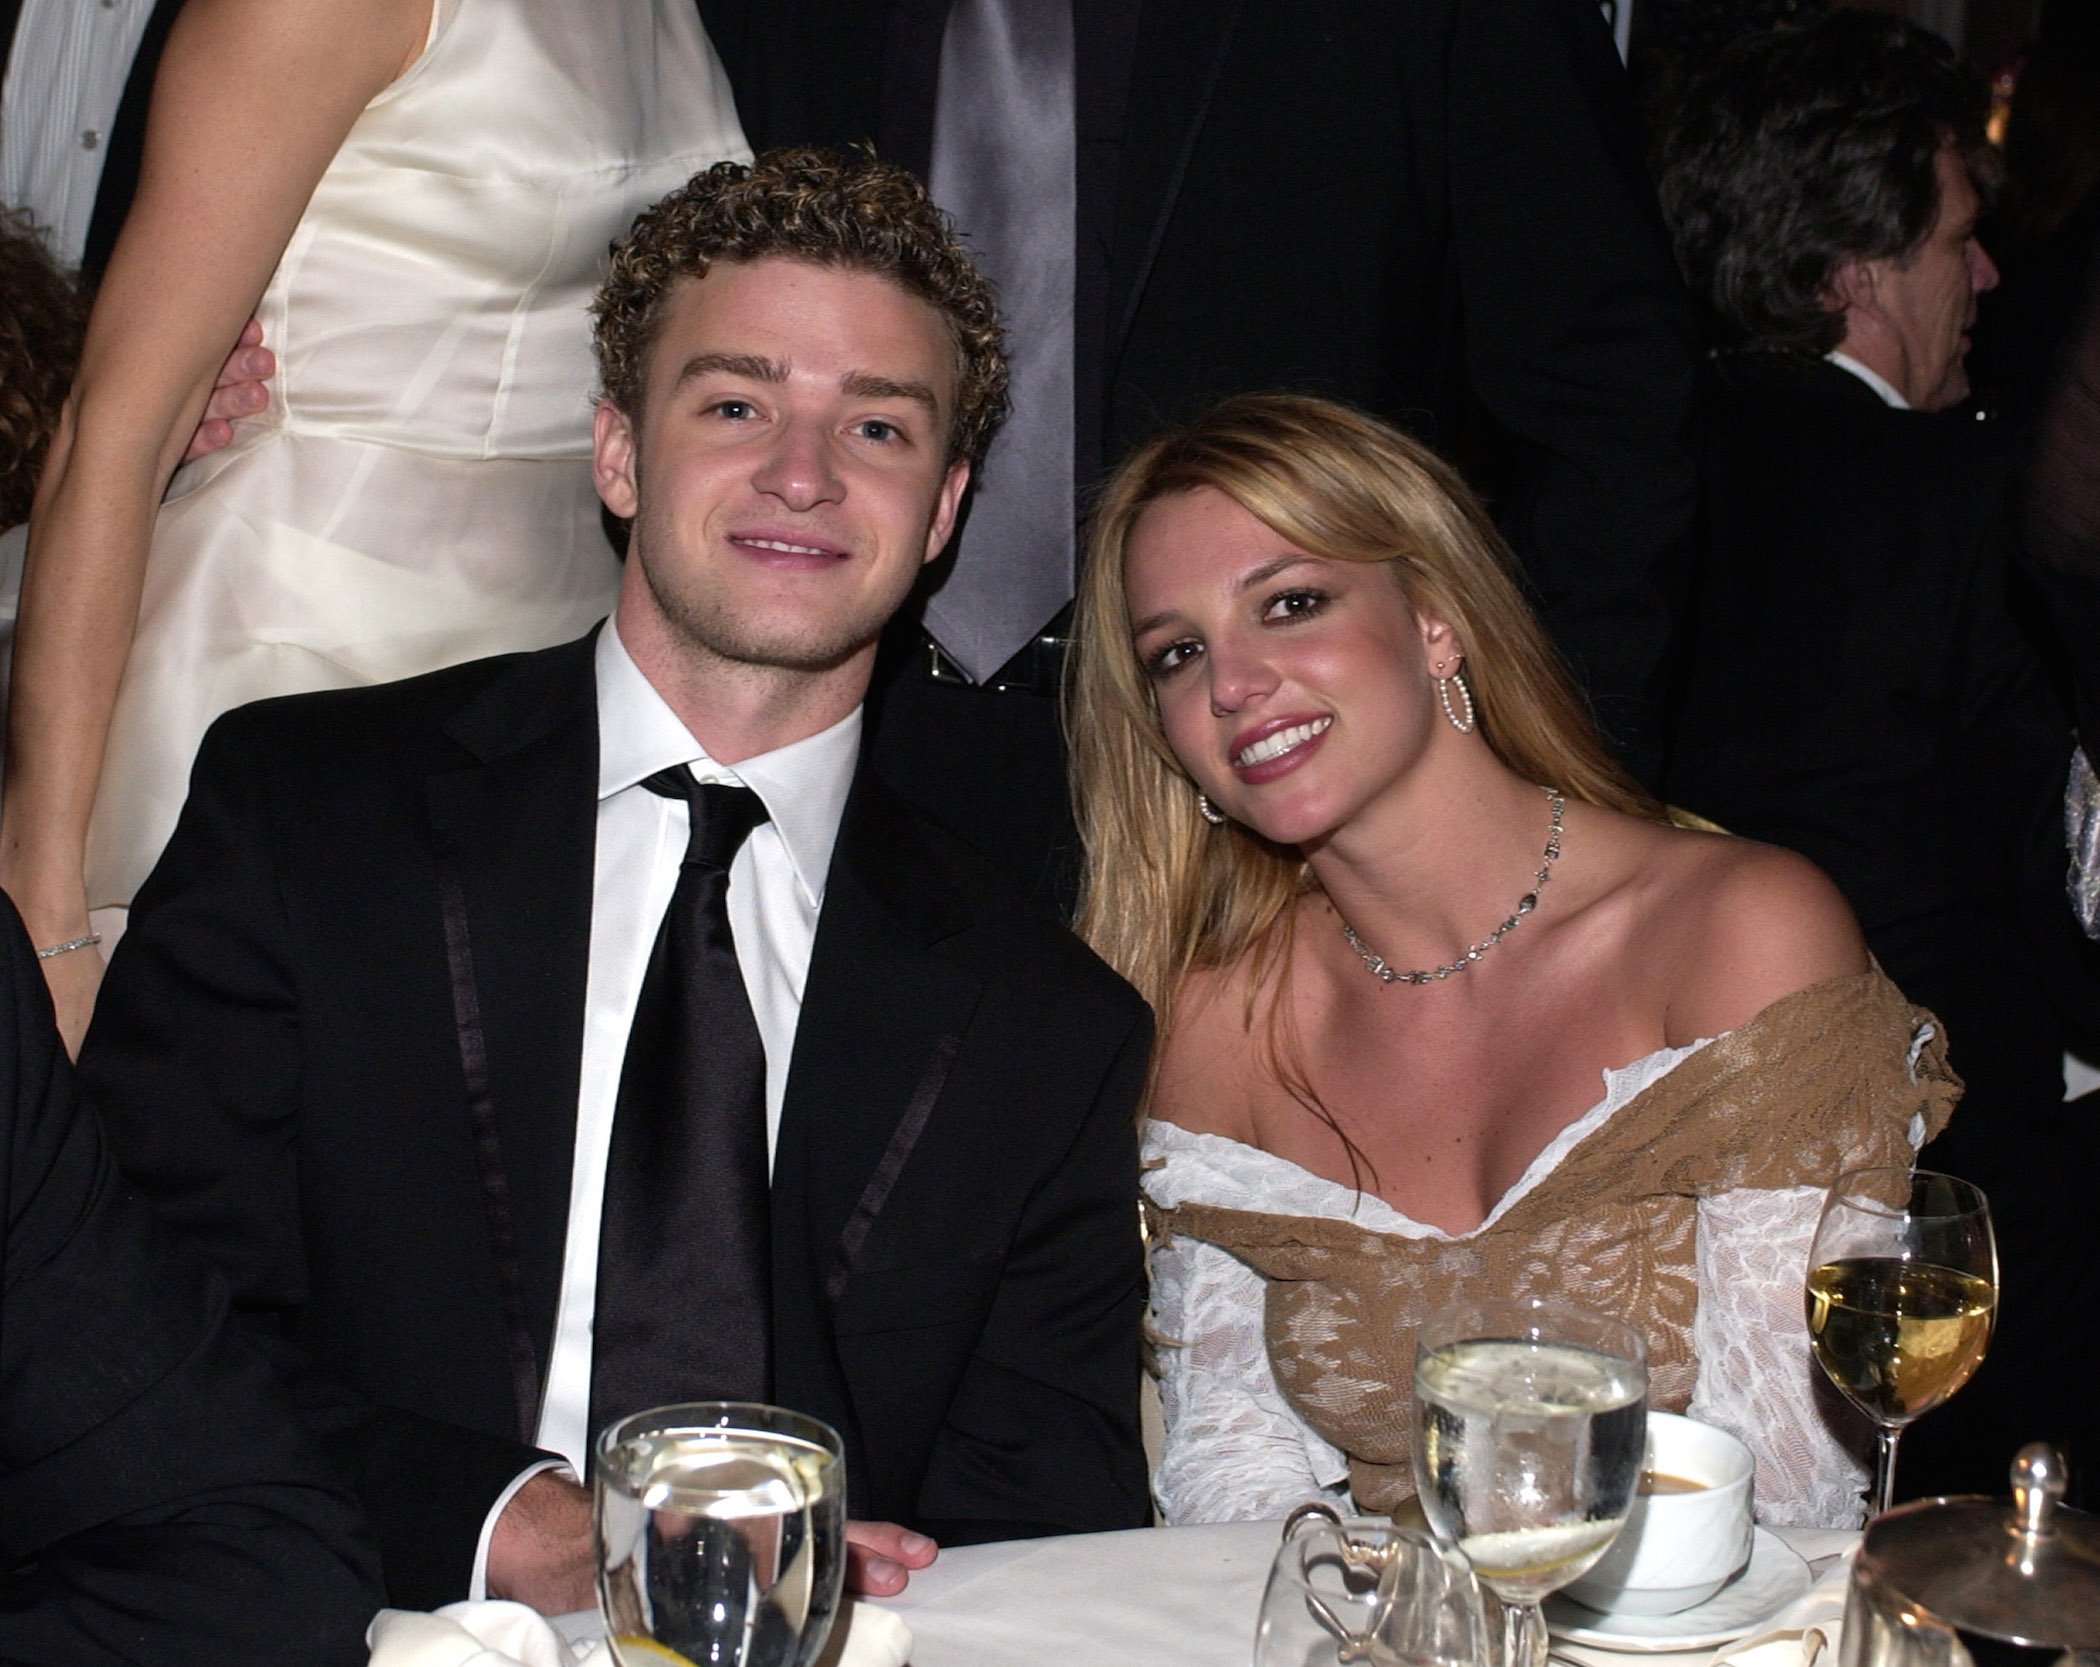 Justin Timberlake and Britney Spears sitting together and smiling